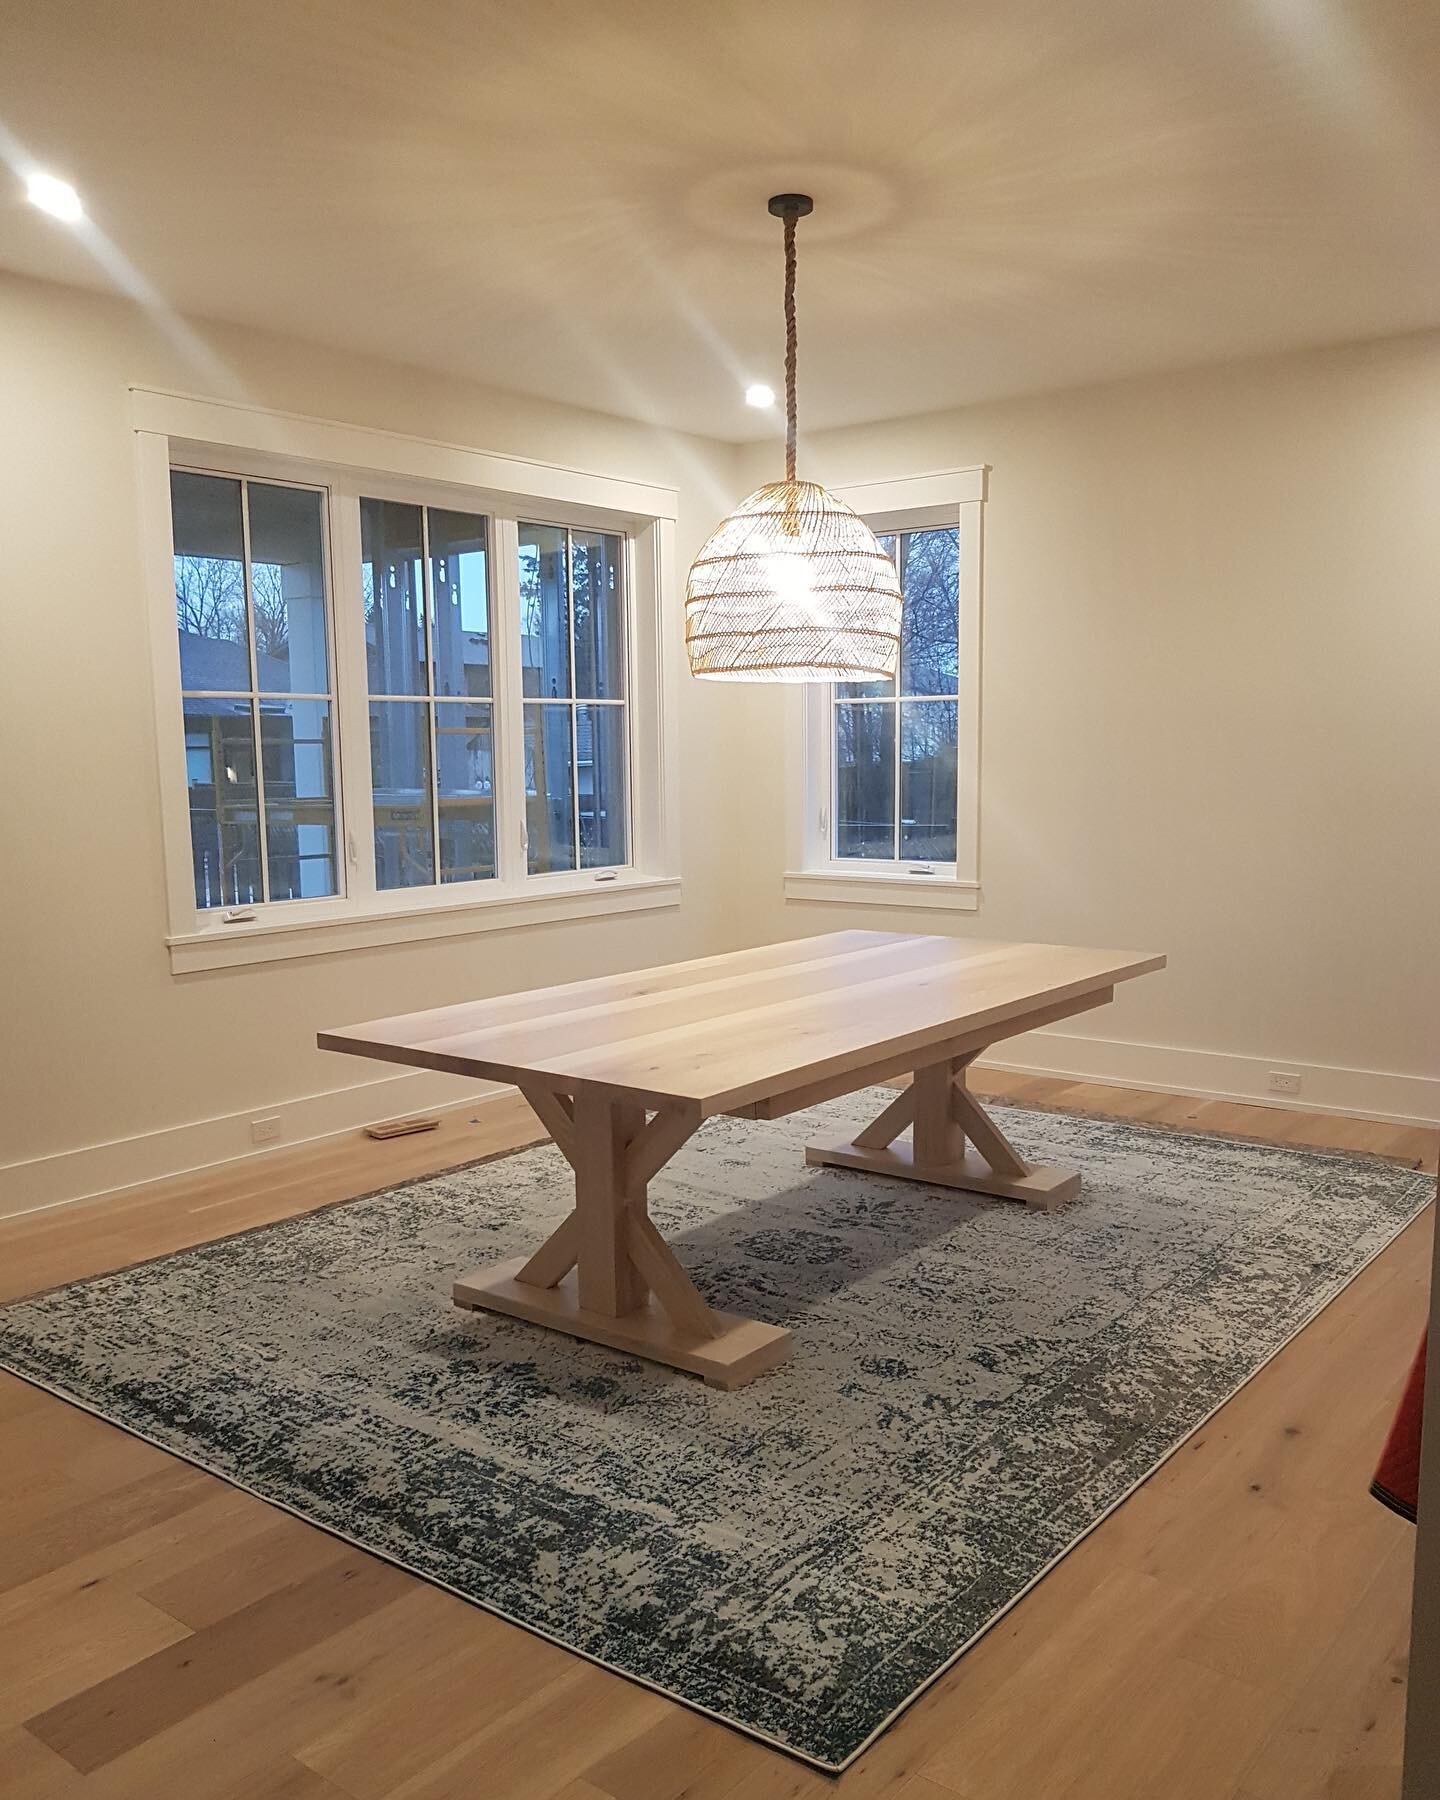 Almost a year later, and we are still in love with this custom ash dining table. Swipe to see the table extend to its larger size!

#customfurniture #extensiondiningtable #diningtable #interiordesign #diningroom #diningroomdecor #diningroomdesign #wo